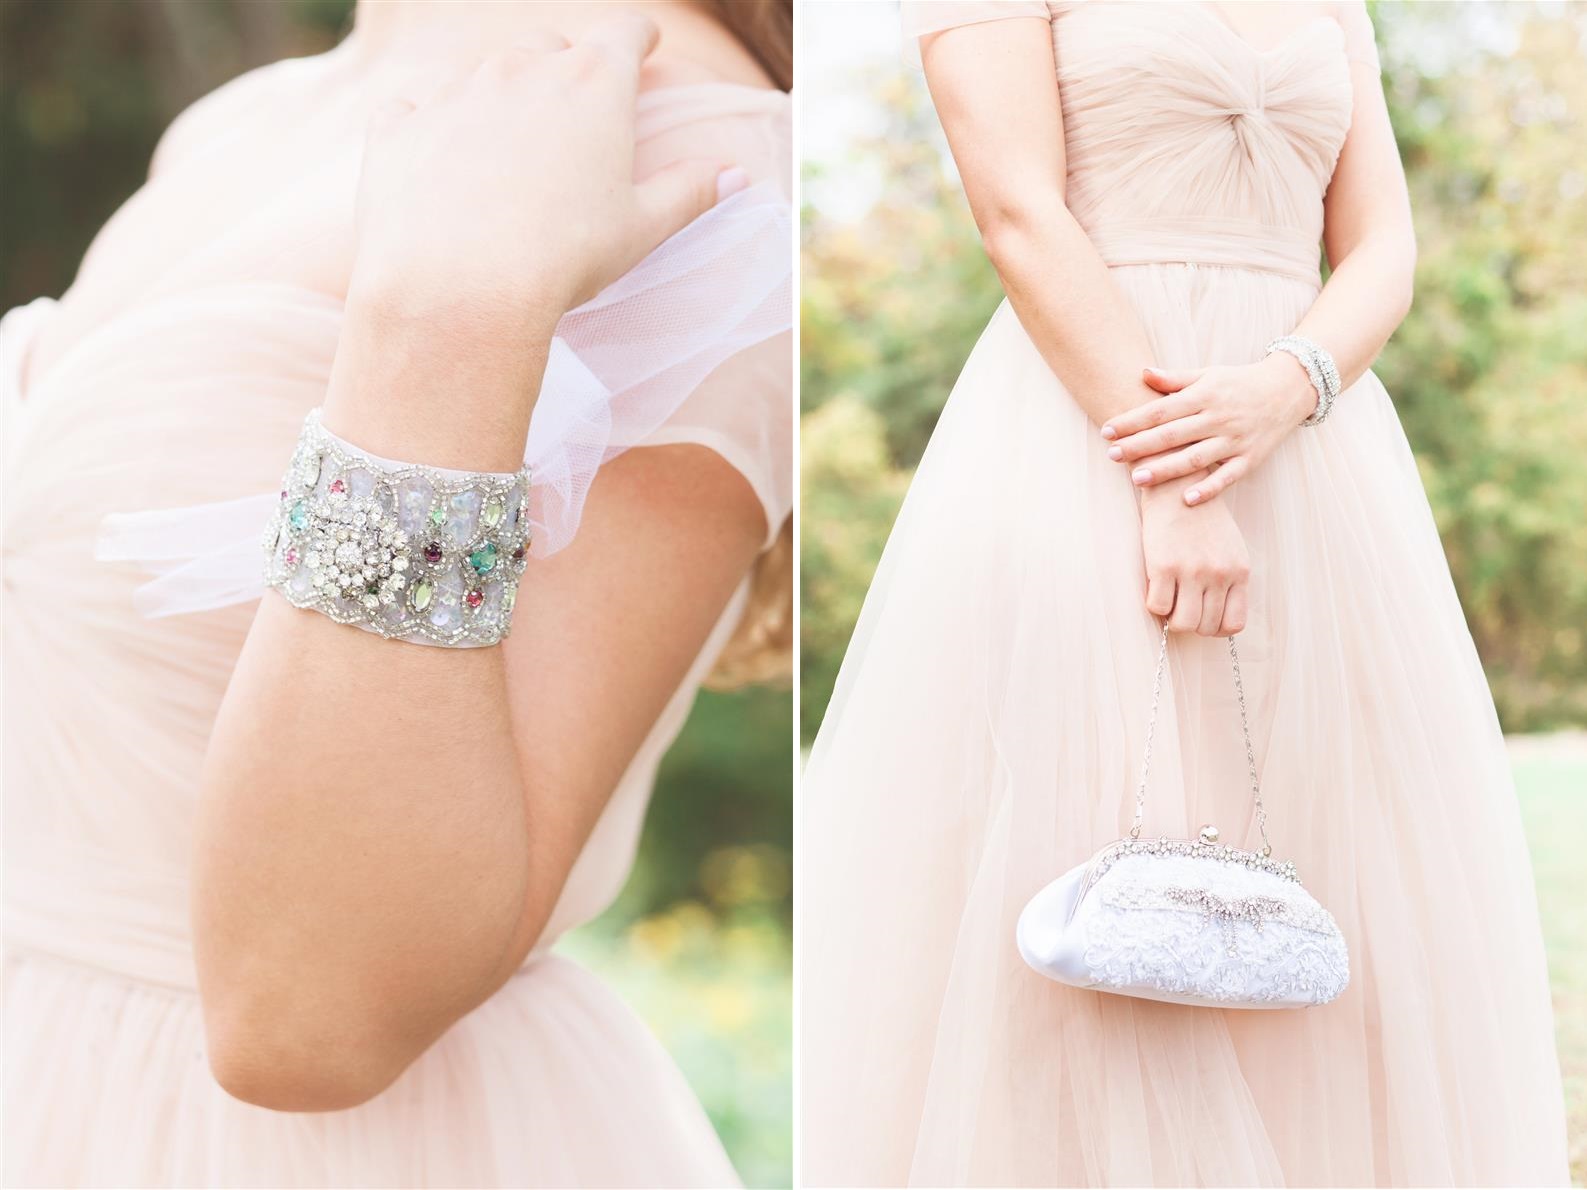 The Gorgeous New Collection of Bridal Accessories from Cloe Noel Designs